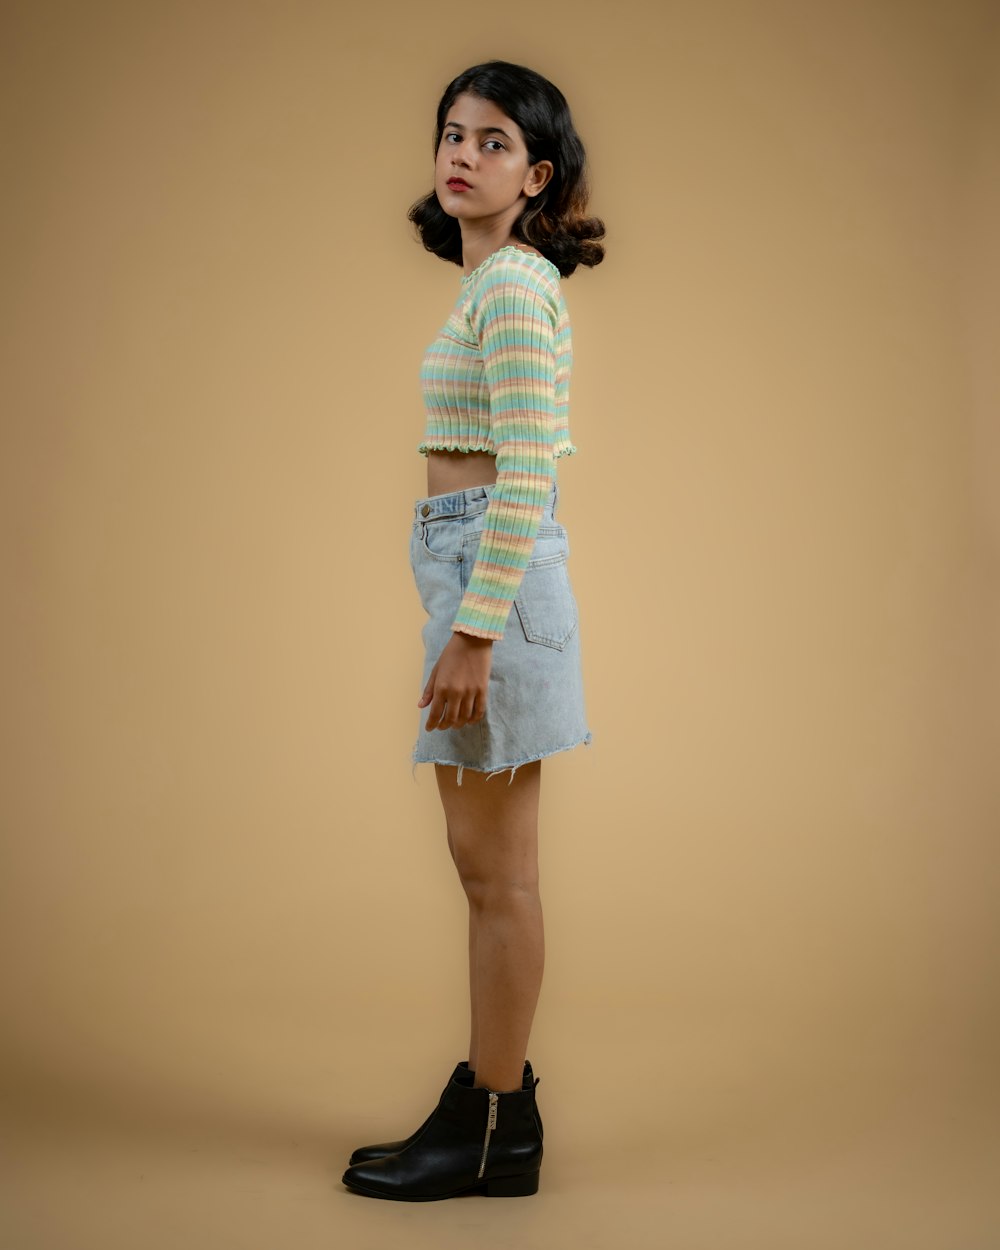 a young girl in a striped shirt and denim skirt